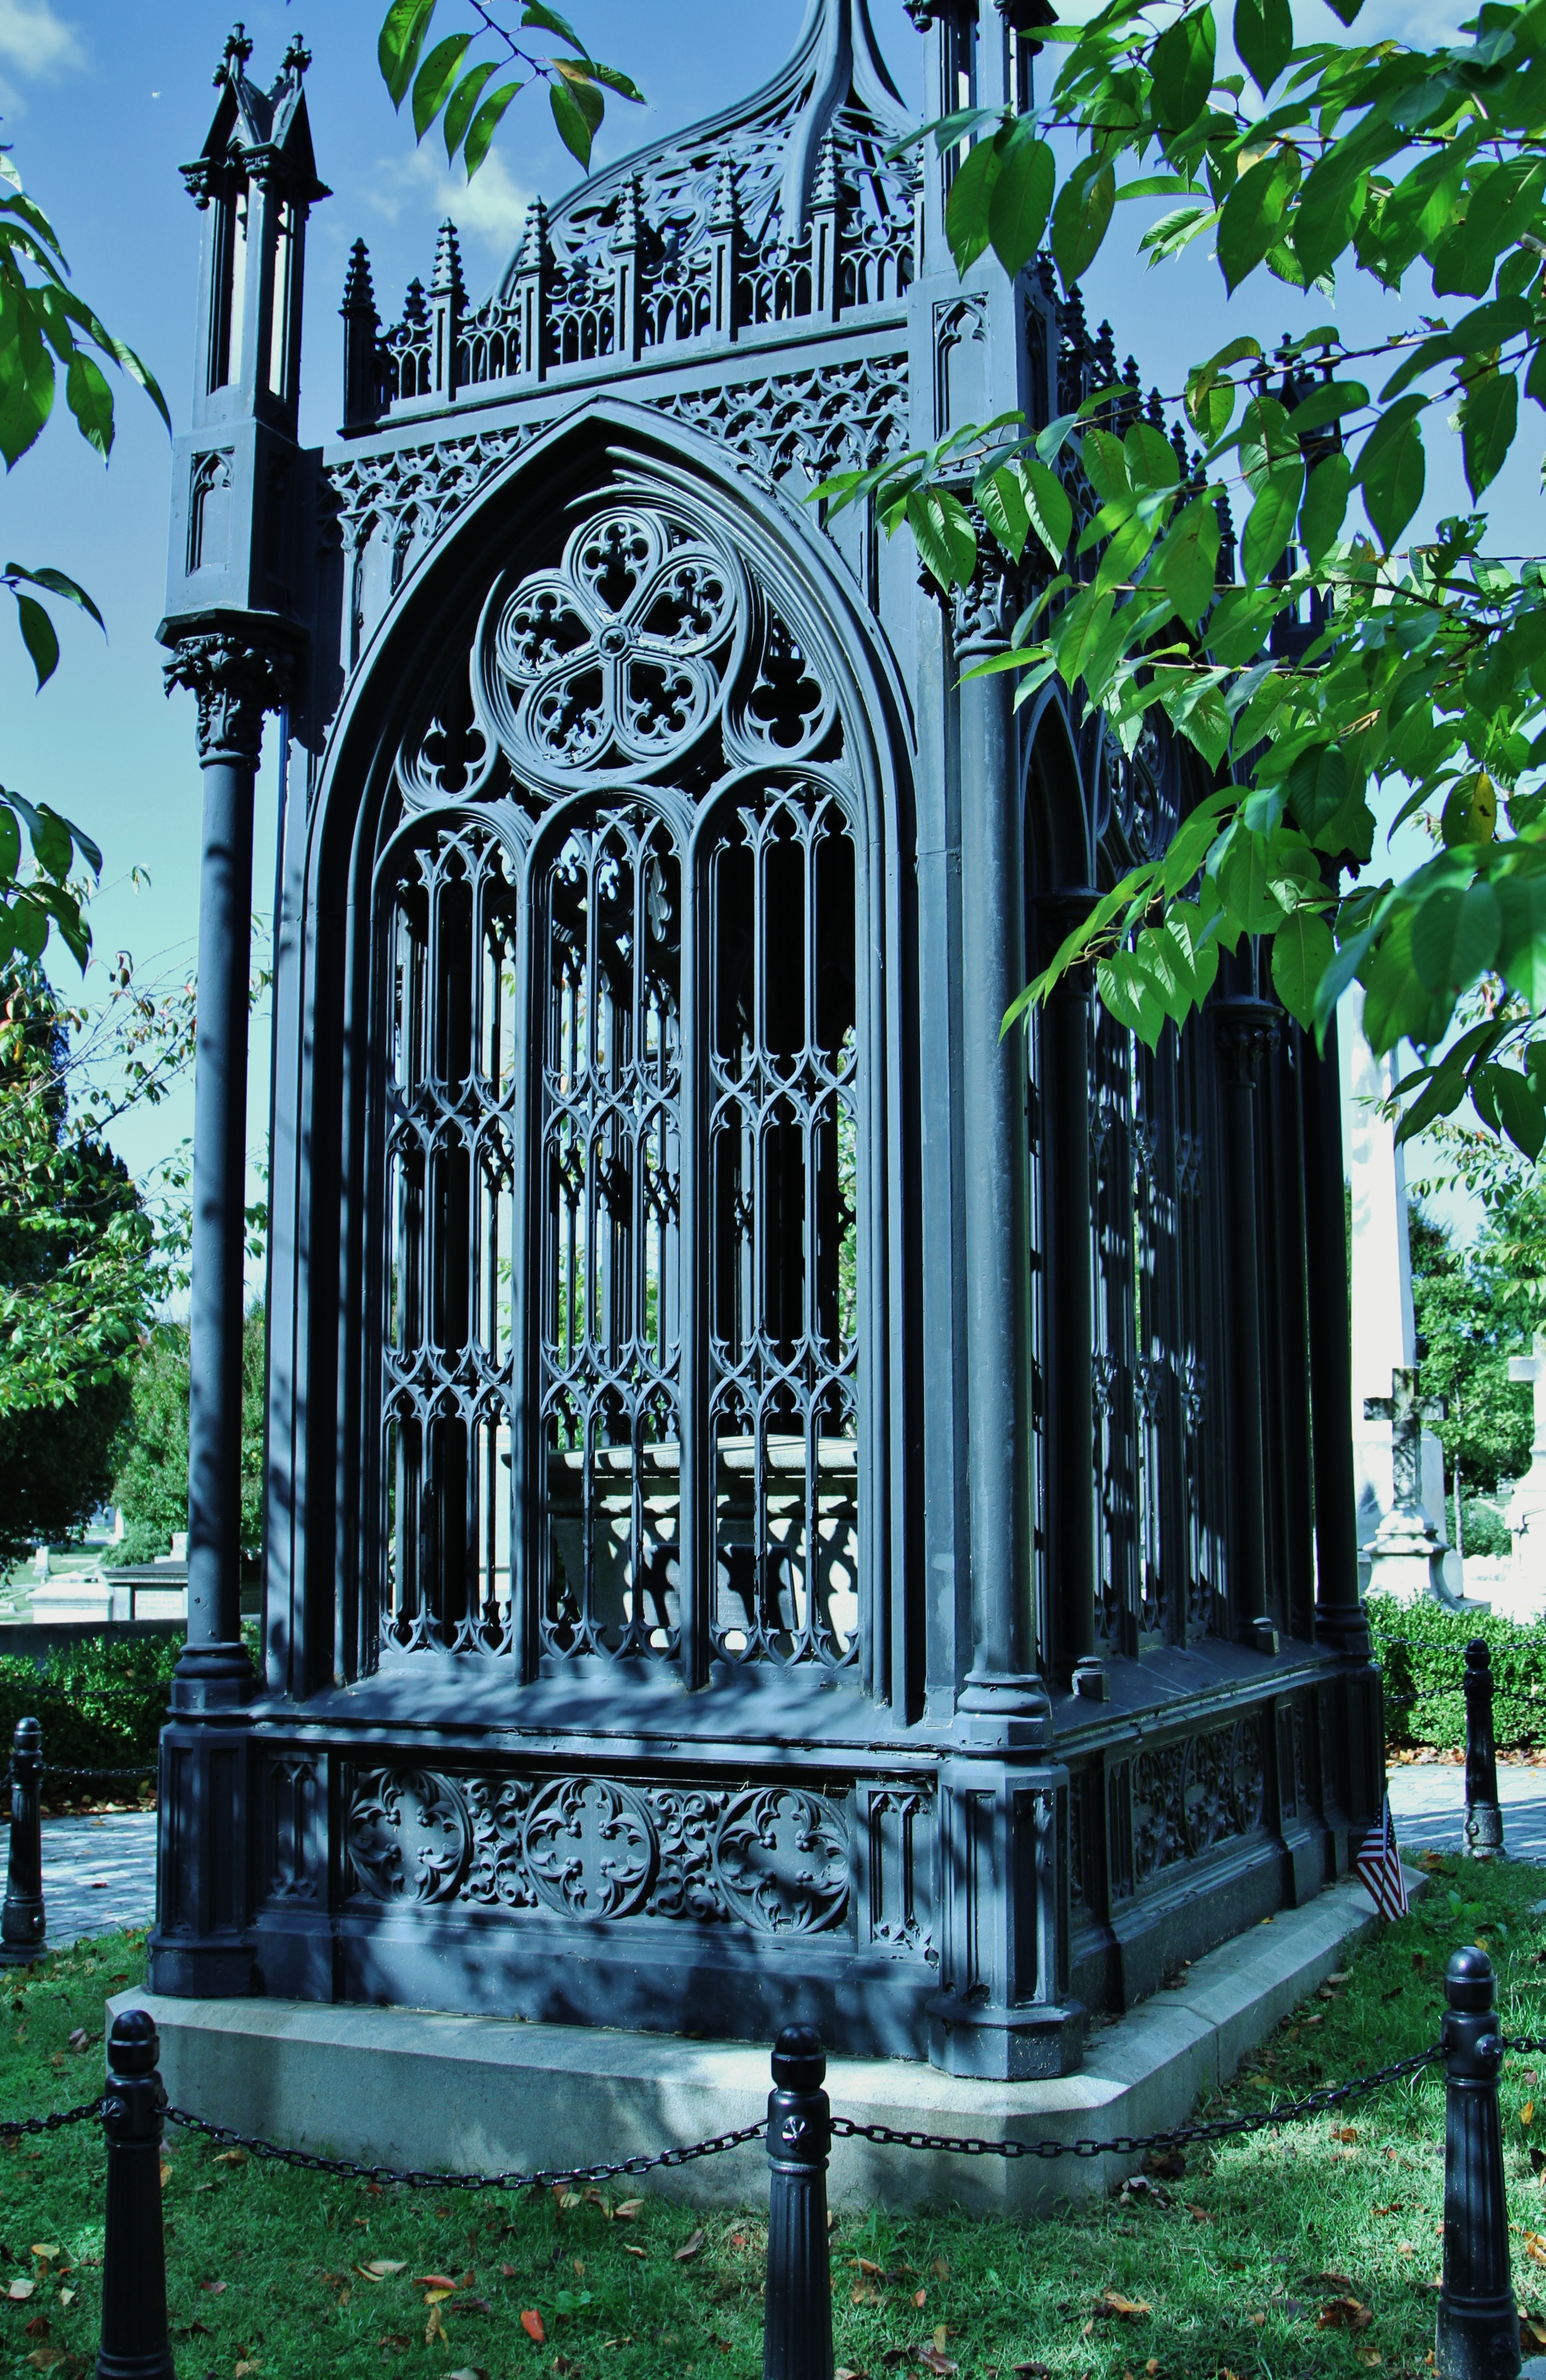  The grave of James Monroe, our fifth president. 